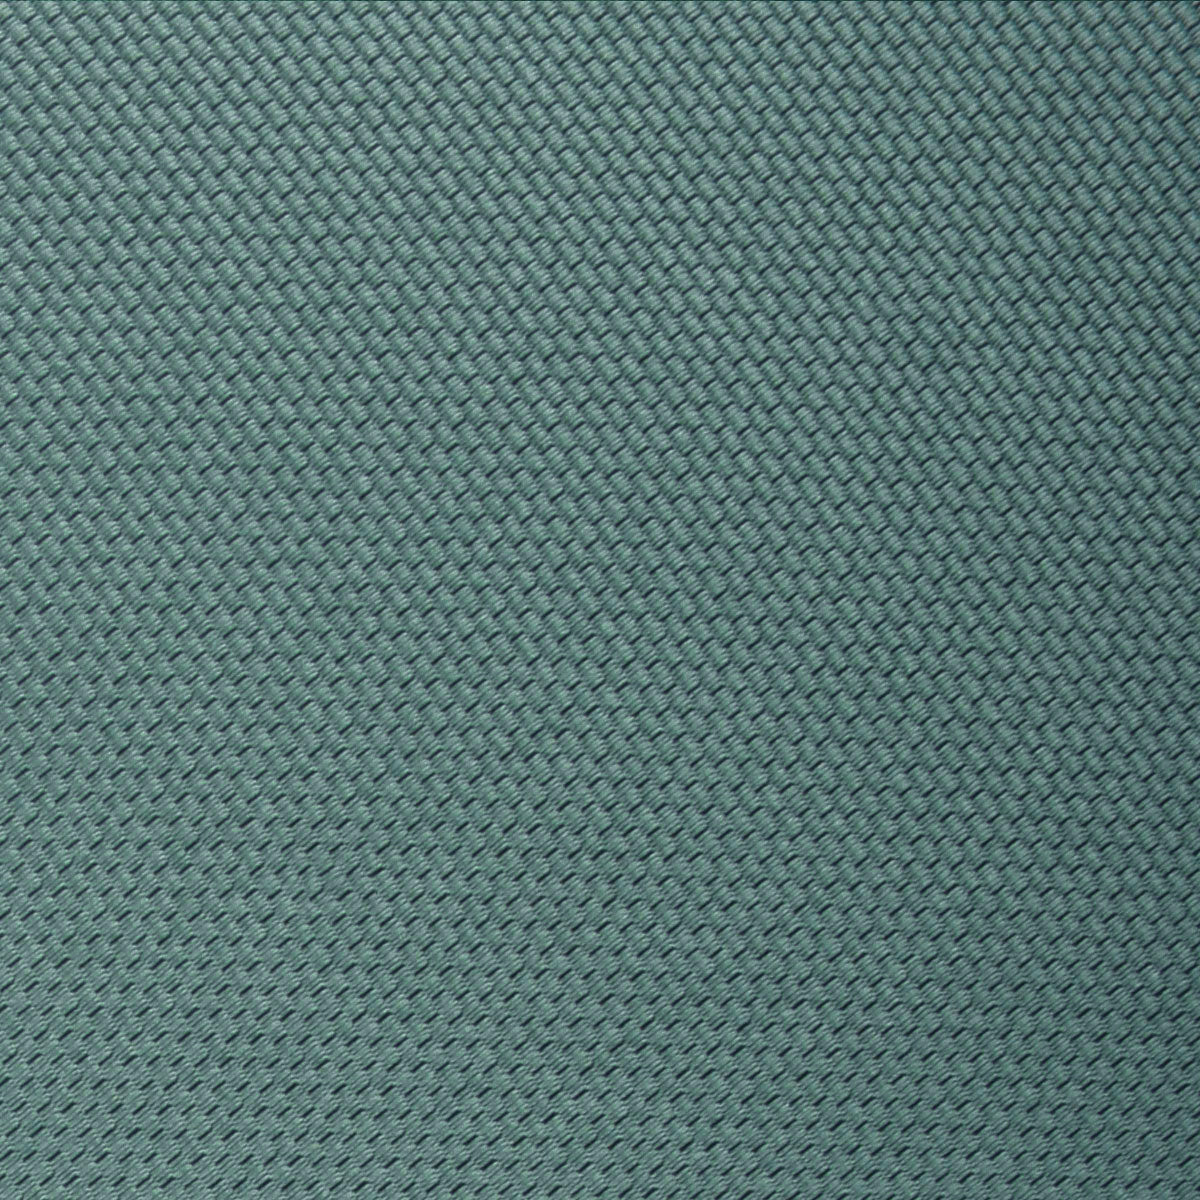 Dusty Teal Blue Weave Bow Tie Fabric